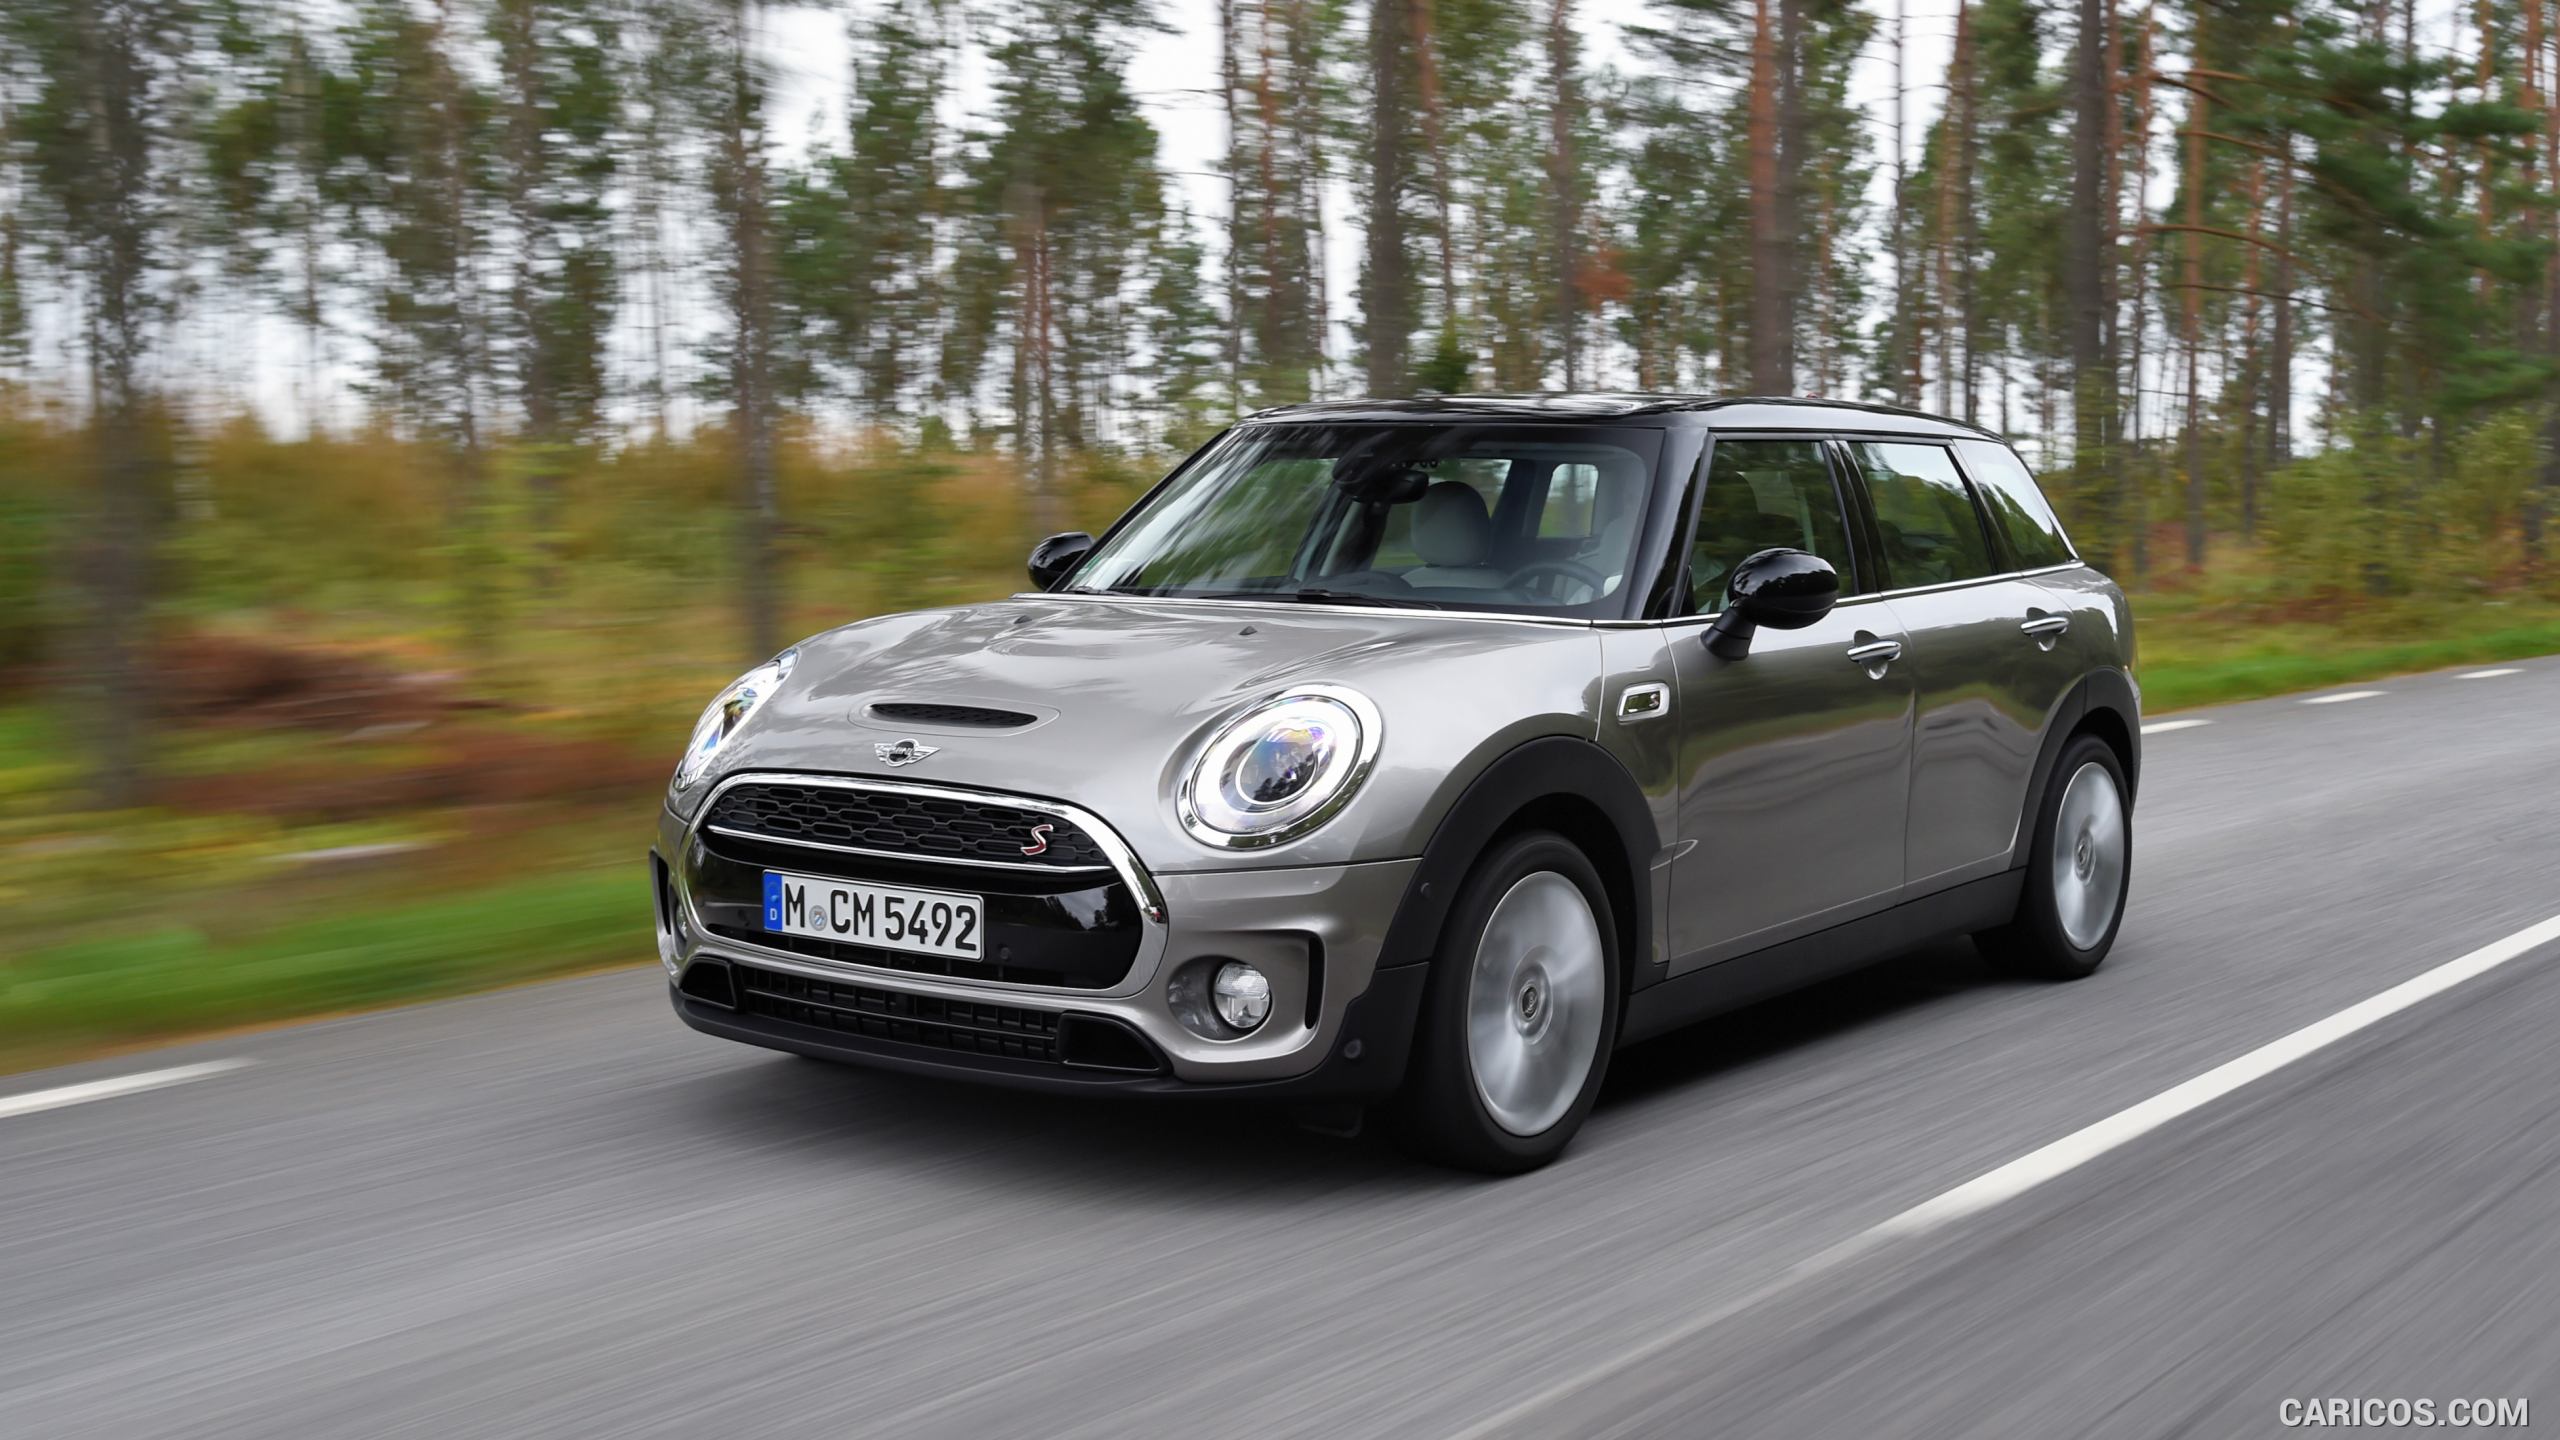 2016 MINI Cooper S Clubman in Metallic Melting Silver - Front, #124 of 380